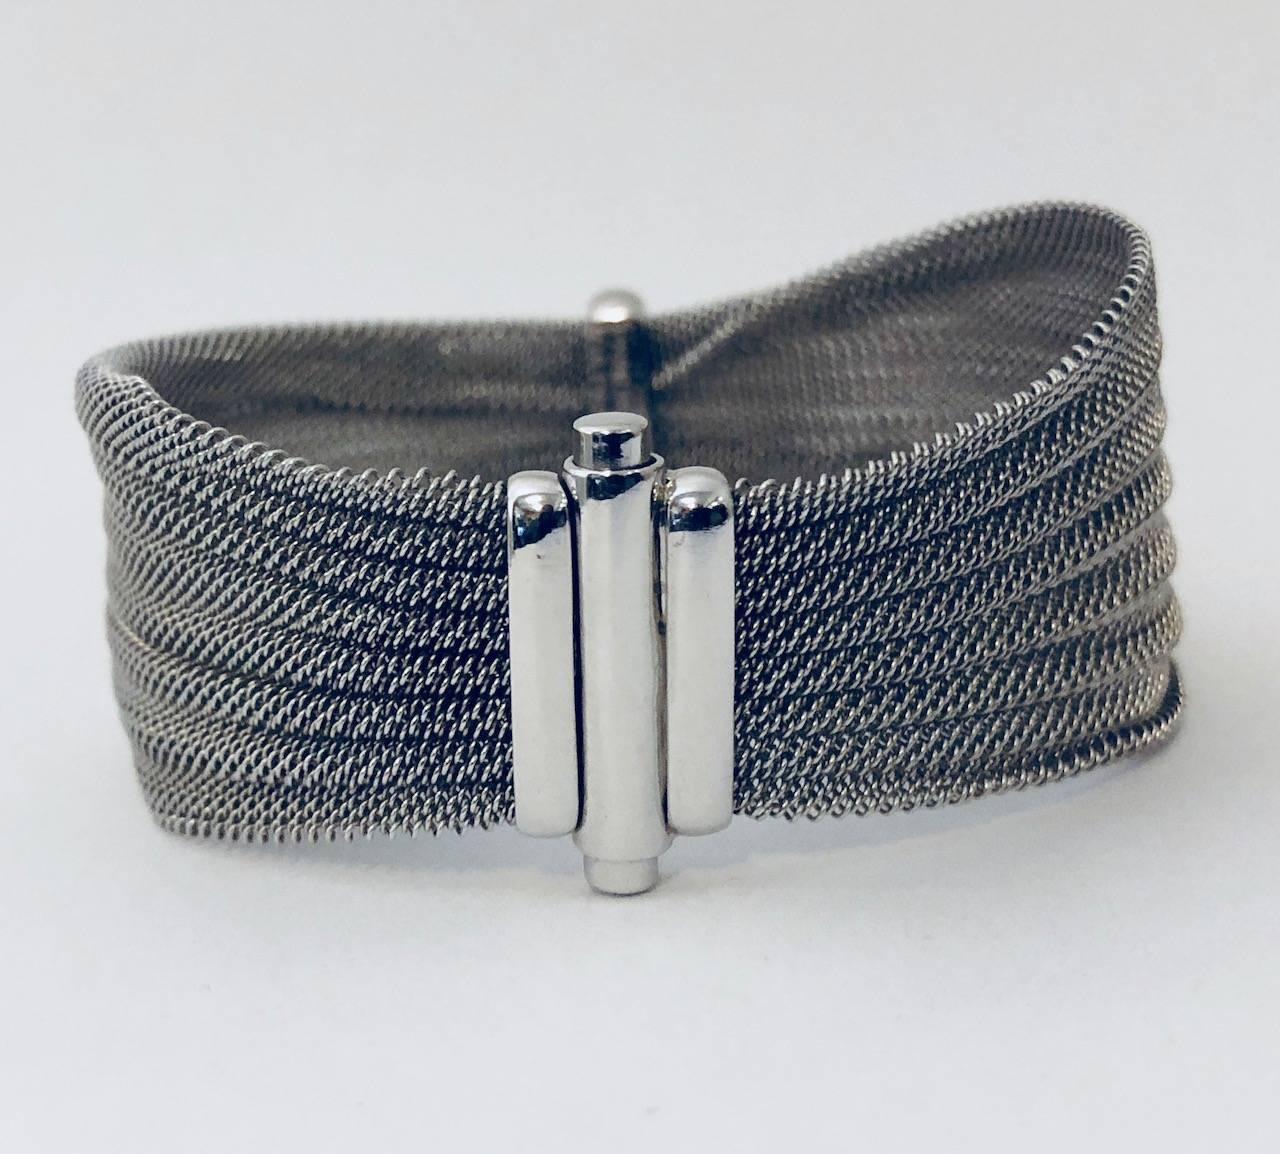 Panda fine jewelry is still marvelous for 2018!  This easy to wear anywhere 18 karat white gold mesh bracelet is a stunner!  Pinched in the center, it features a solid white pave diamond bar.  Approximately 1/2 carat total weight.  A double pronged